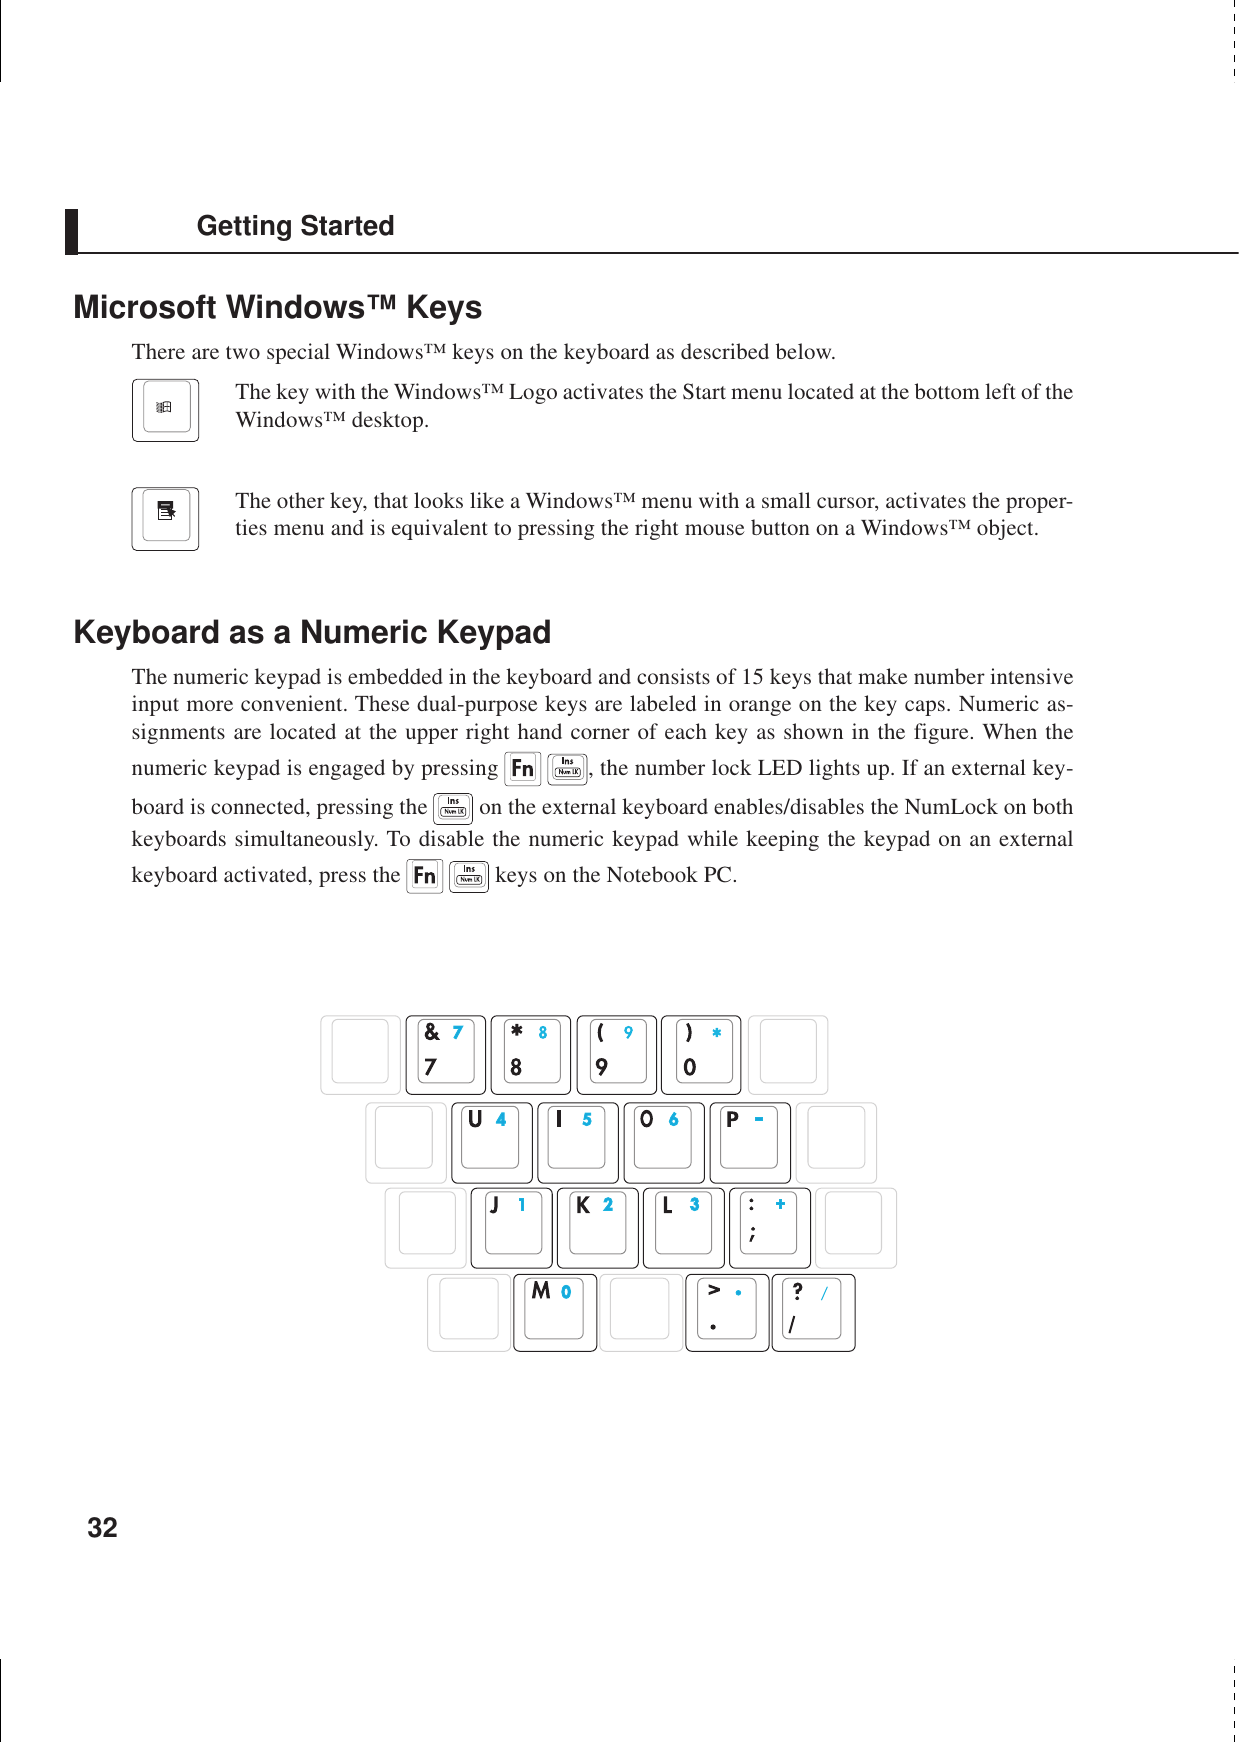 32Getting StartedMicrosoft Windows™ KeysThere are two special Windows™ keys on the keyboard as described below.The key with the Windows™ Logo activates the Start menu located at the bottom left of theWindows™ desktop.The other key, that looks like a Windows™ menu with a small cursor, activates the proper-ties menu and is equivalent to pressing the right mouse button on a Windows™ object.Keyboard as a Numeric KeypadThe numeric keypad is embedded in the keyboard and consists of 15 keys that make number intensiveinput more convenient. These dual-purpose keys are labeled in orange on the key caps. Numeric as-signments are located at the upper right hand corner of each key as shown in the figure. When thenumeric keypad is engaged by pressing   , the number lock LED lights up. If an external key-board is connected, pressing the   on the external keyboard enables/disables the NumLock on bothkeyboards simultaneously. To disable the numeric keypad while keeping the keypad on an externalkeyboard activated, press the    keys on the Notebook PC.